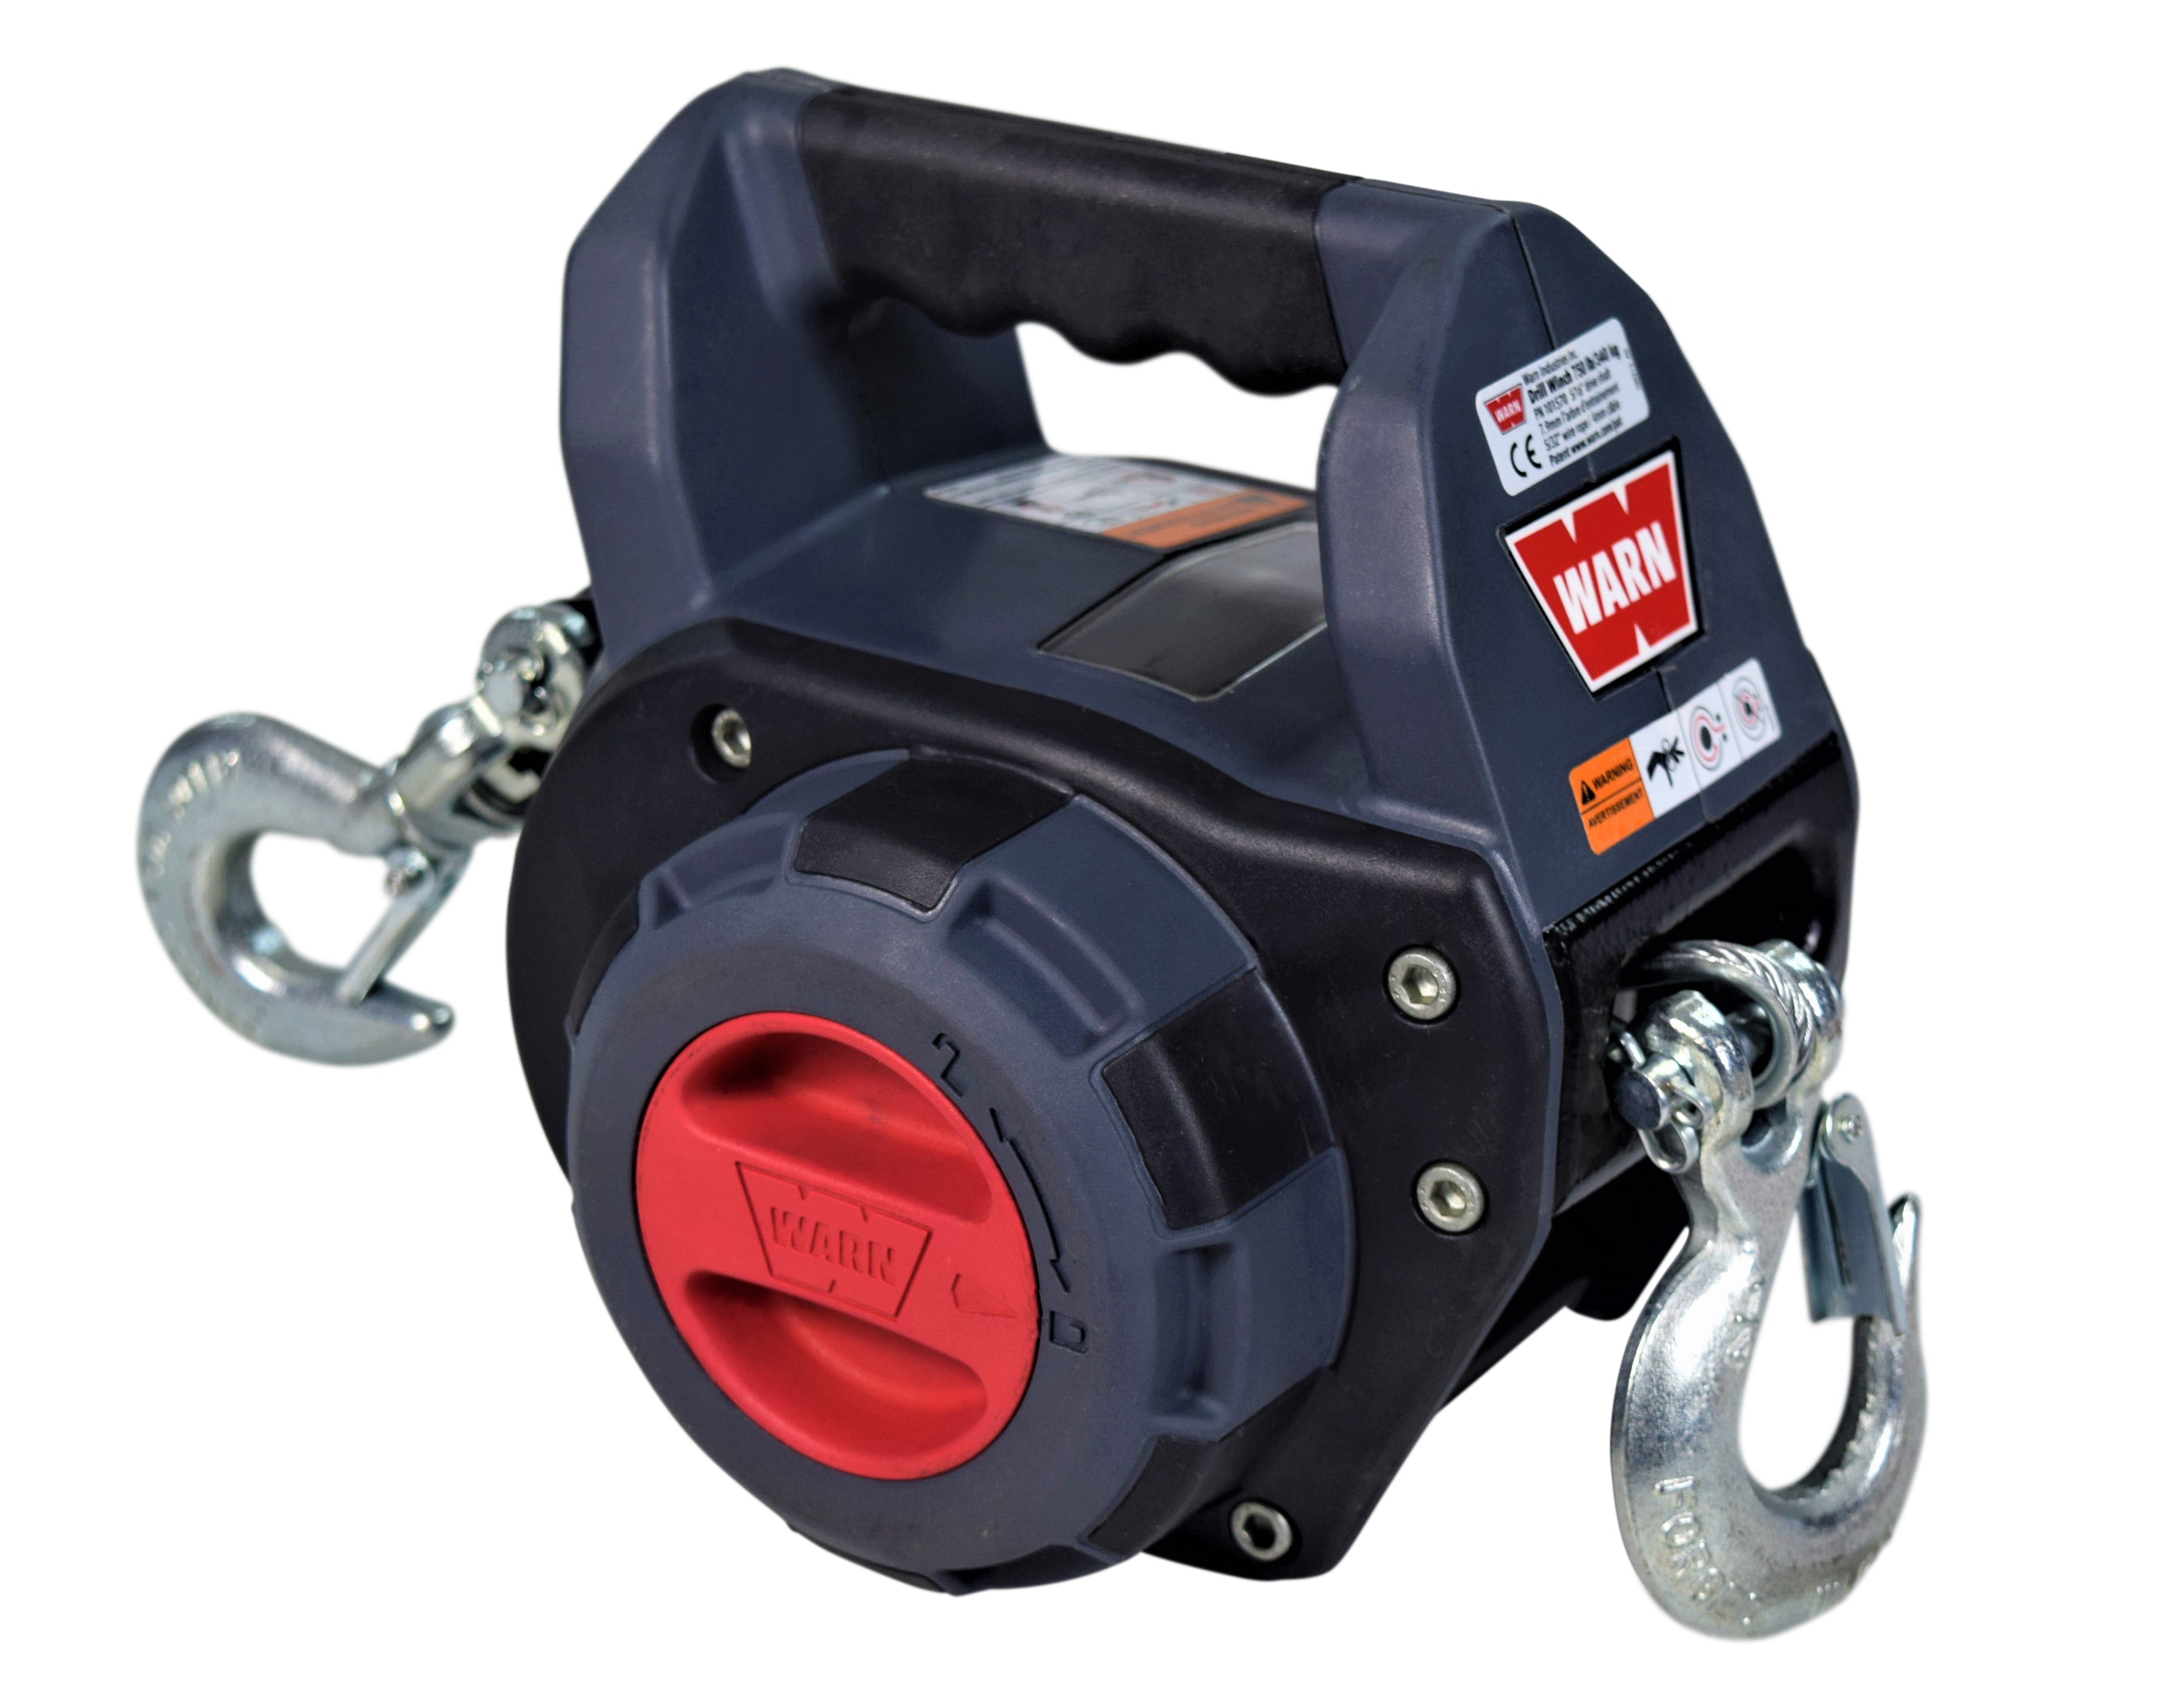 Warn-101570-Drill-Winch-750-lbs-Capacity-40-Synthetic-Rope-Free-spool-Clutch-image-2